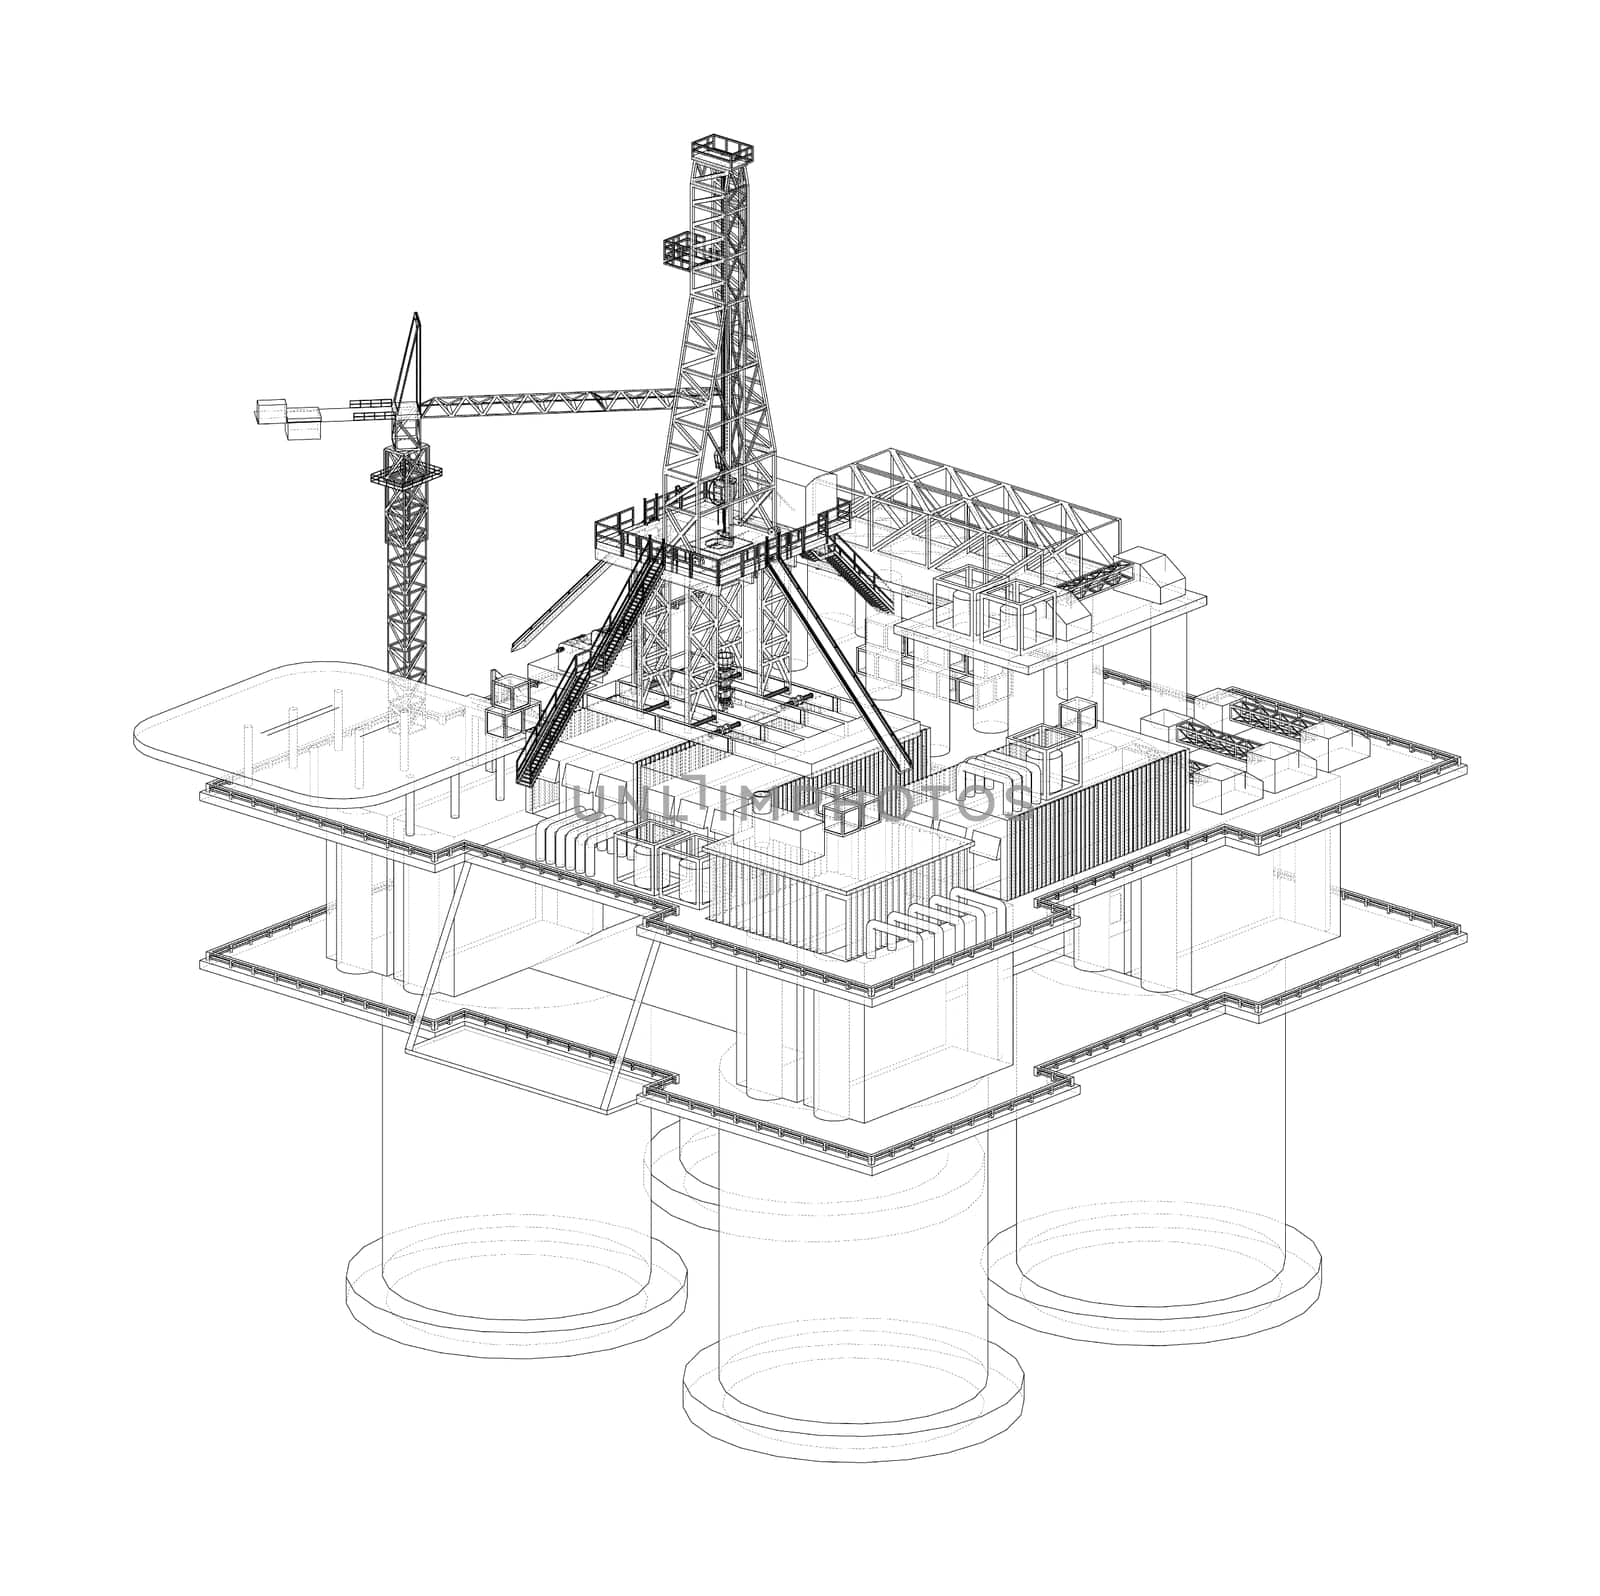 Offshore Oil Rig. 3d illustration. Wire-frame style. Orthography